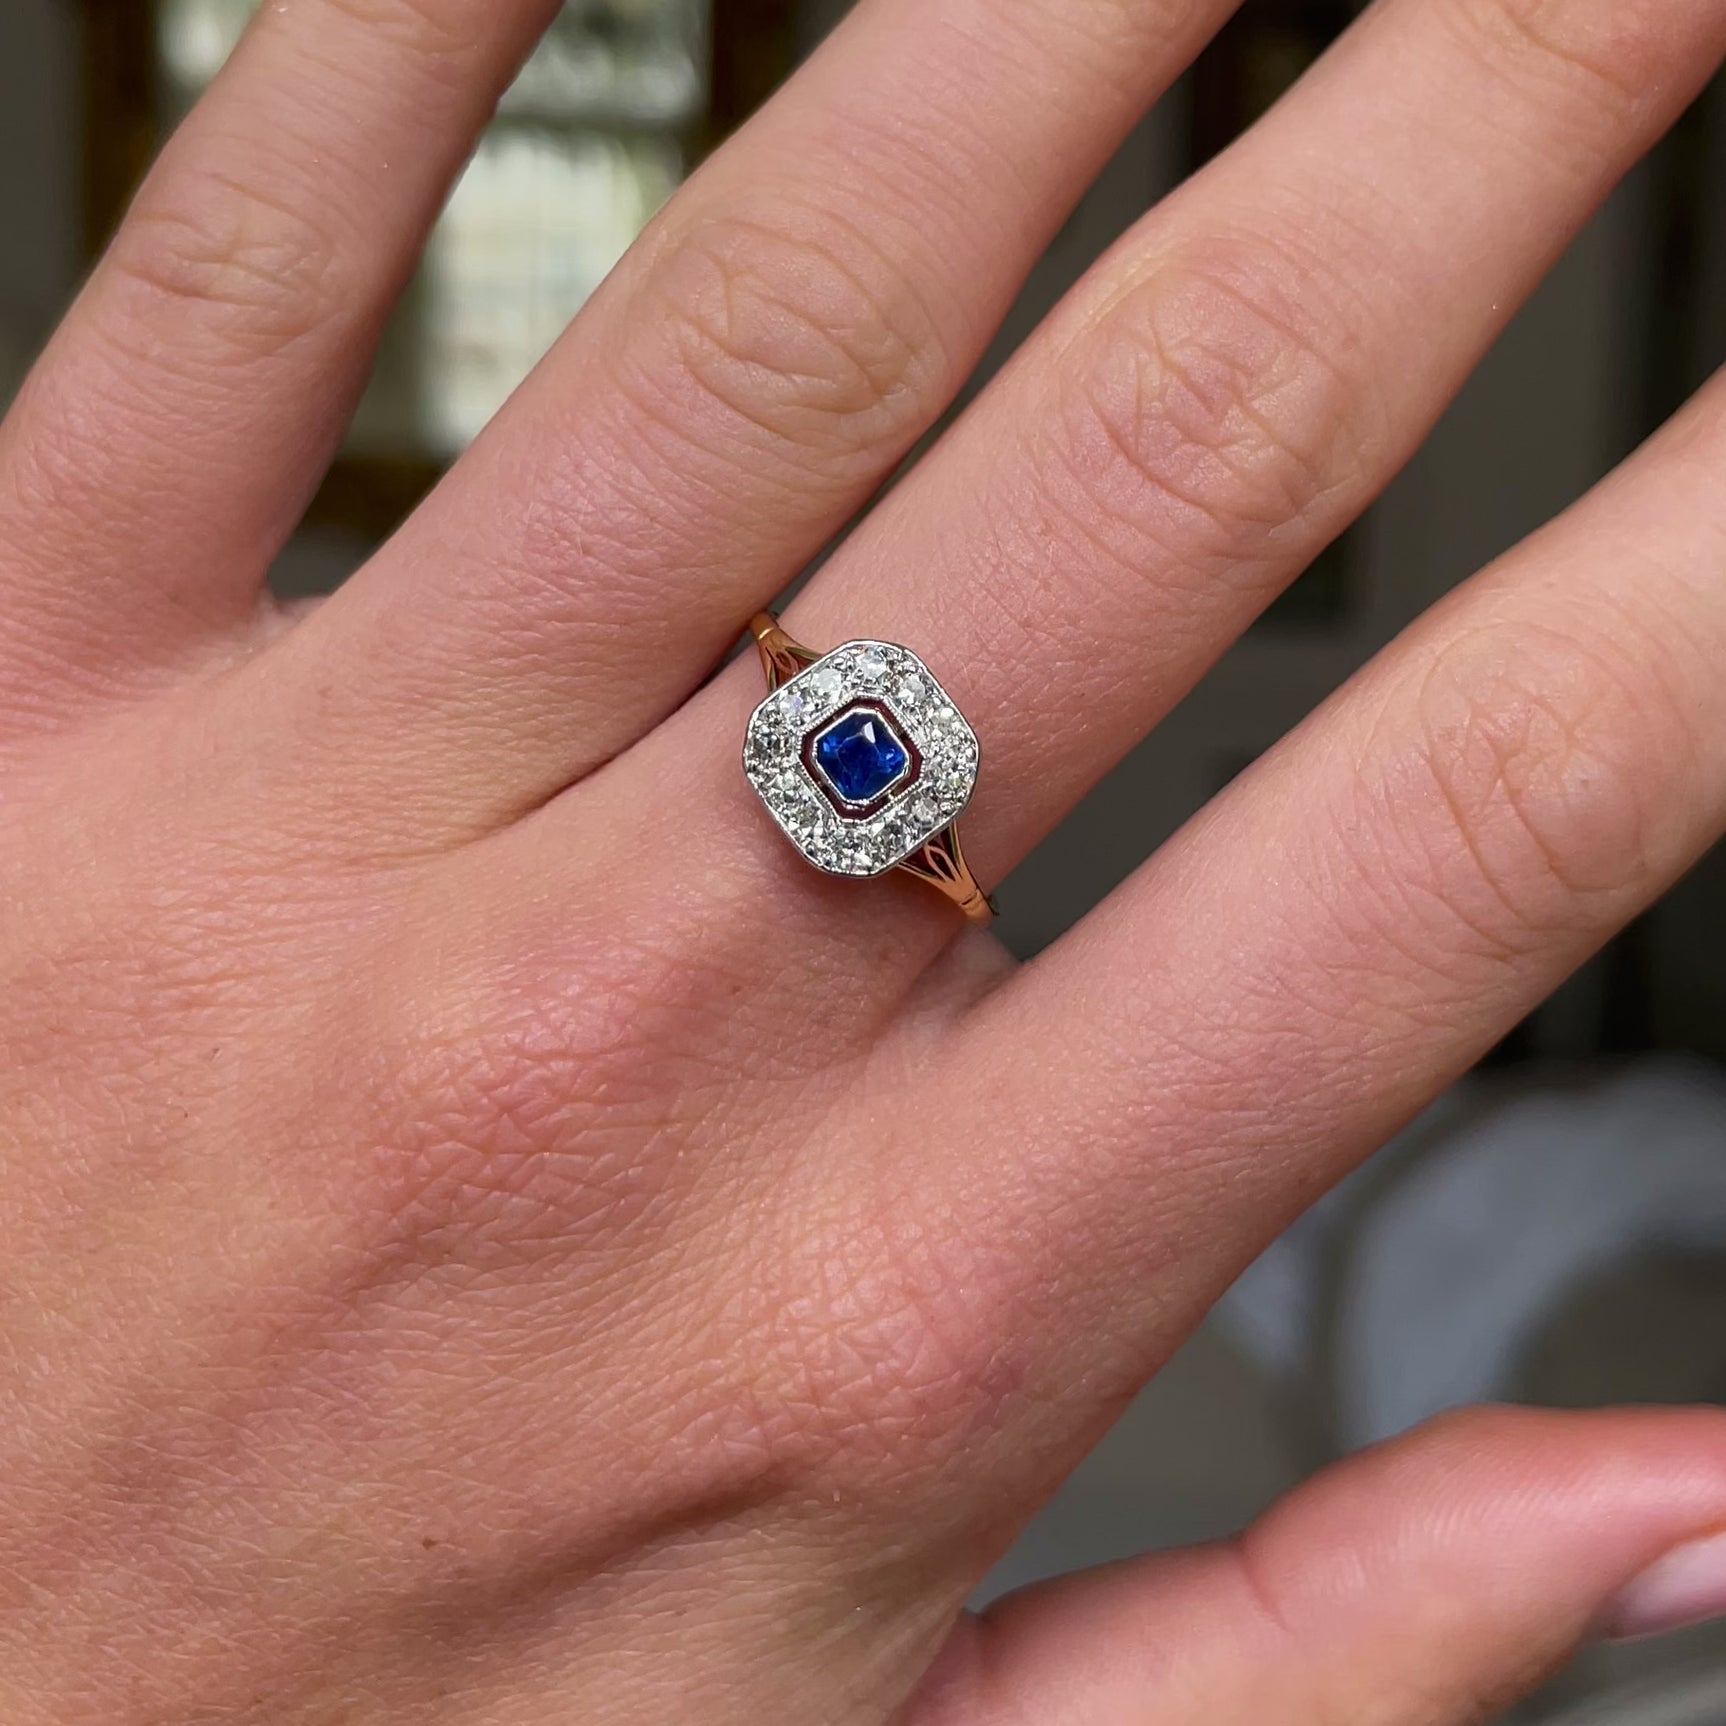 Sapphire and diamond engagement ring, worn on hand and rotated to give perspective.